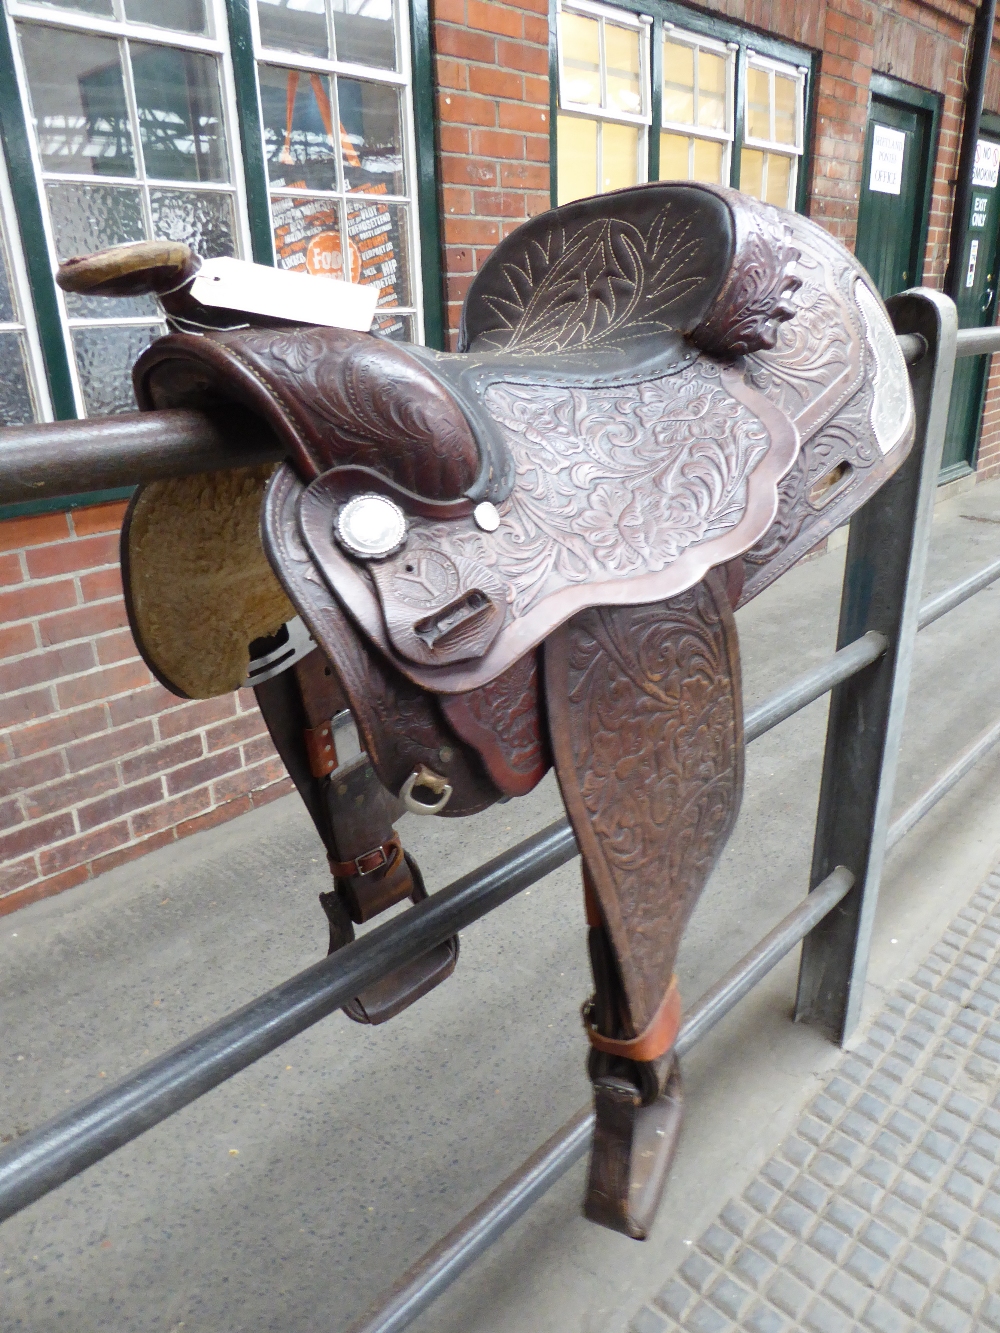 Full size brown leather Western saddle made in Wyoming, USA with decorative stitching and whitemetal